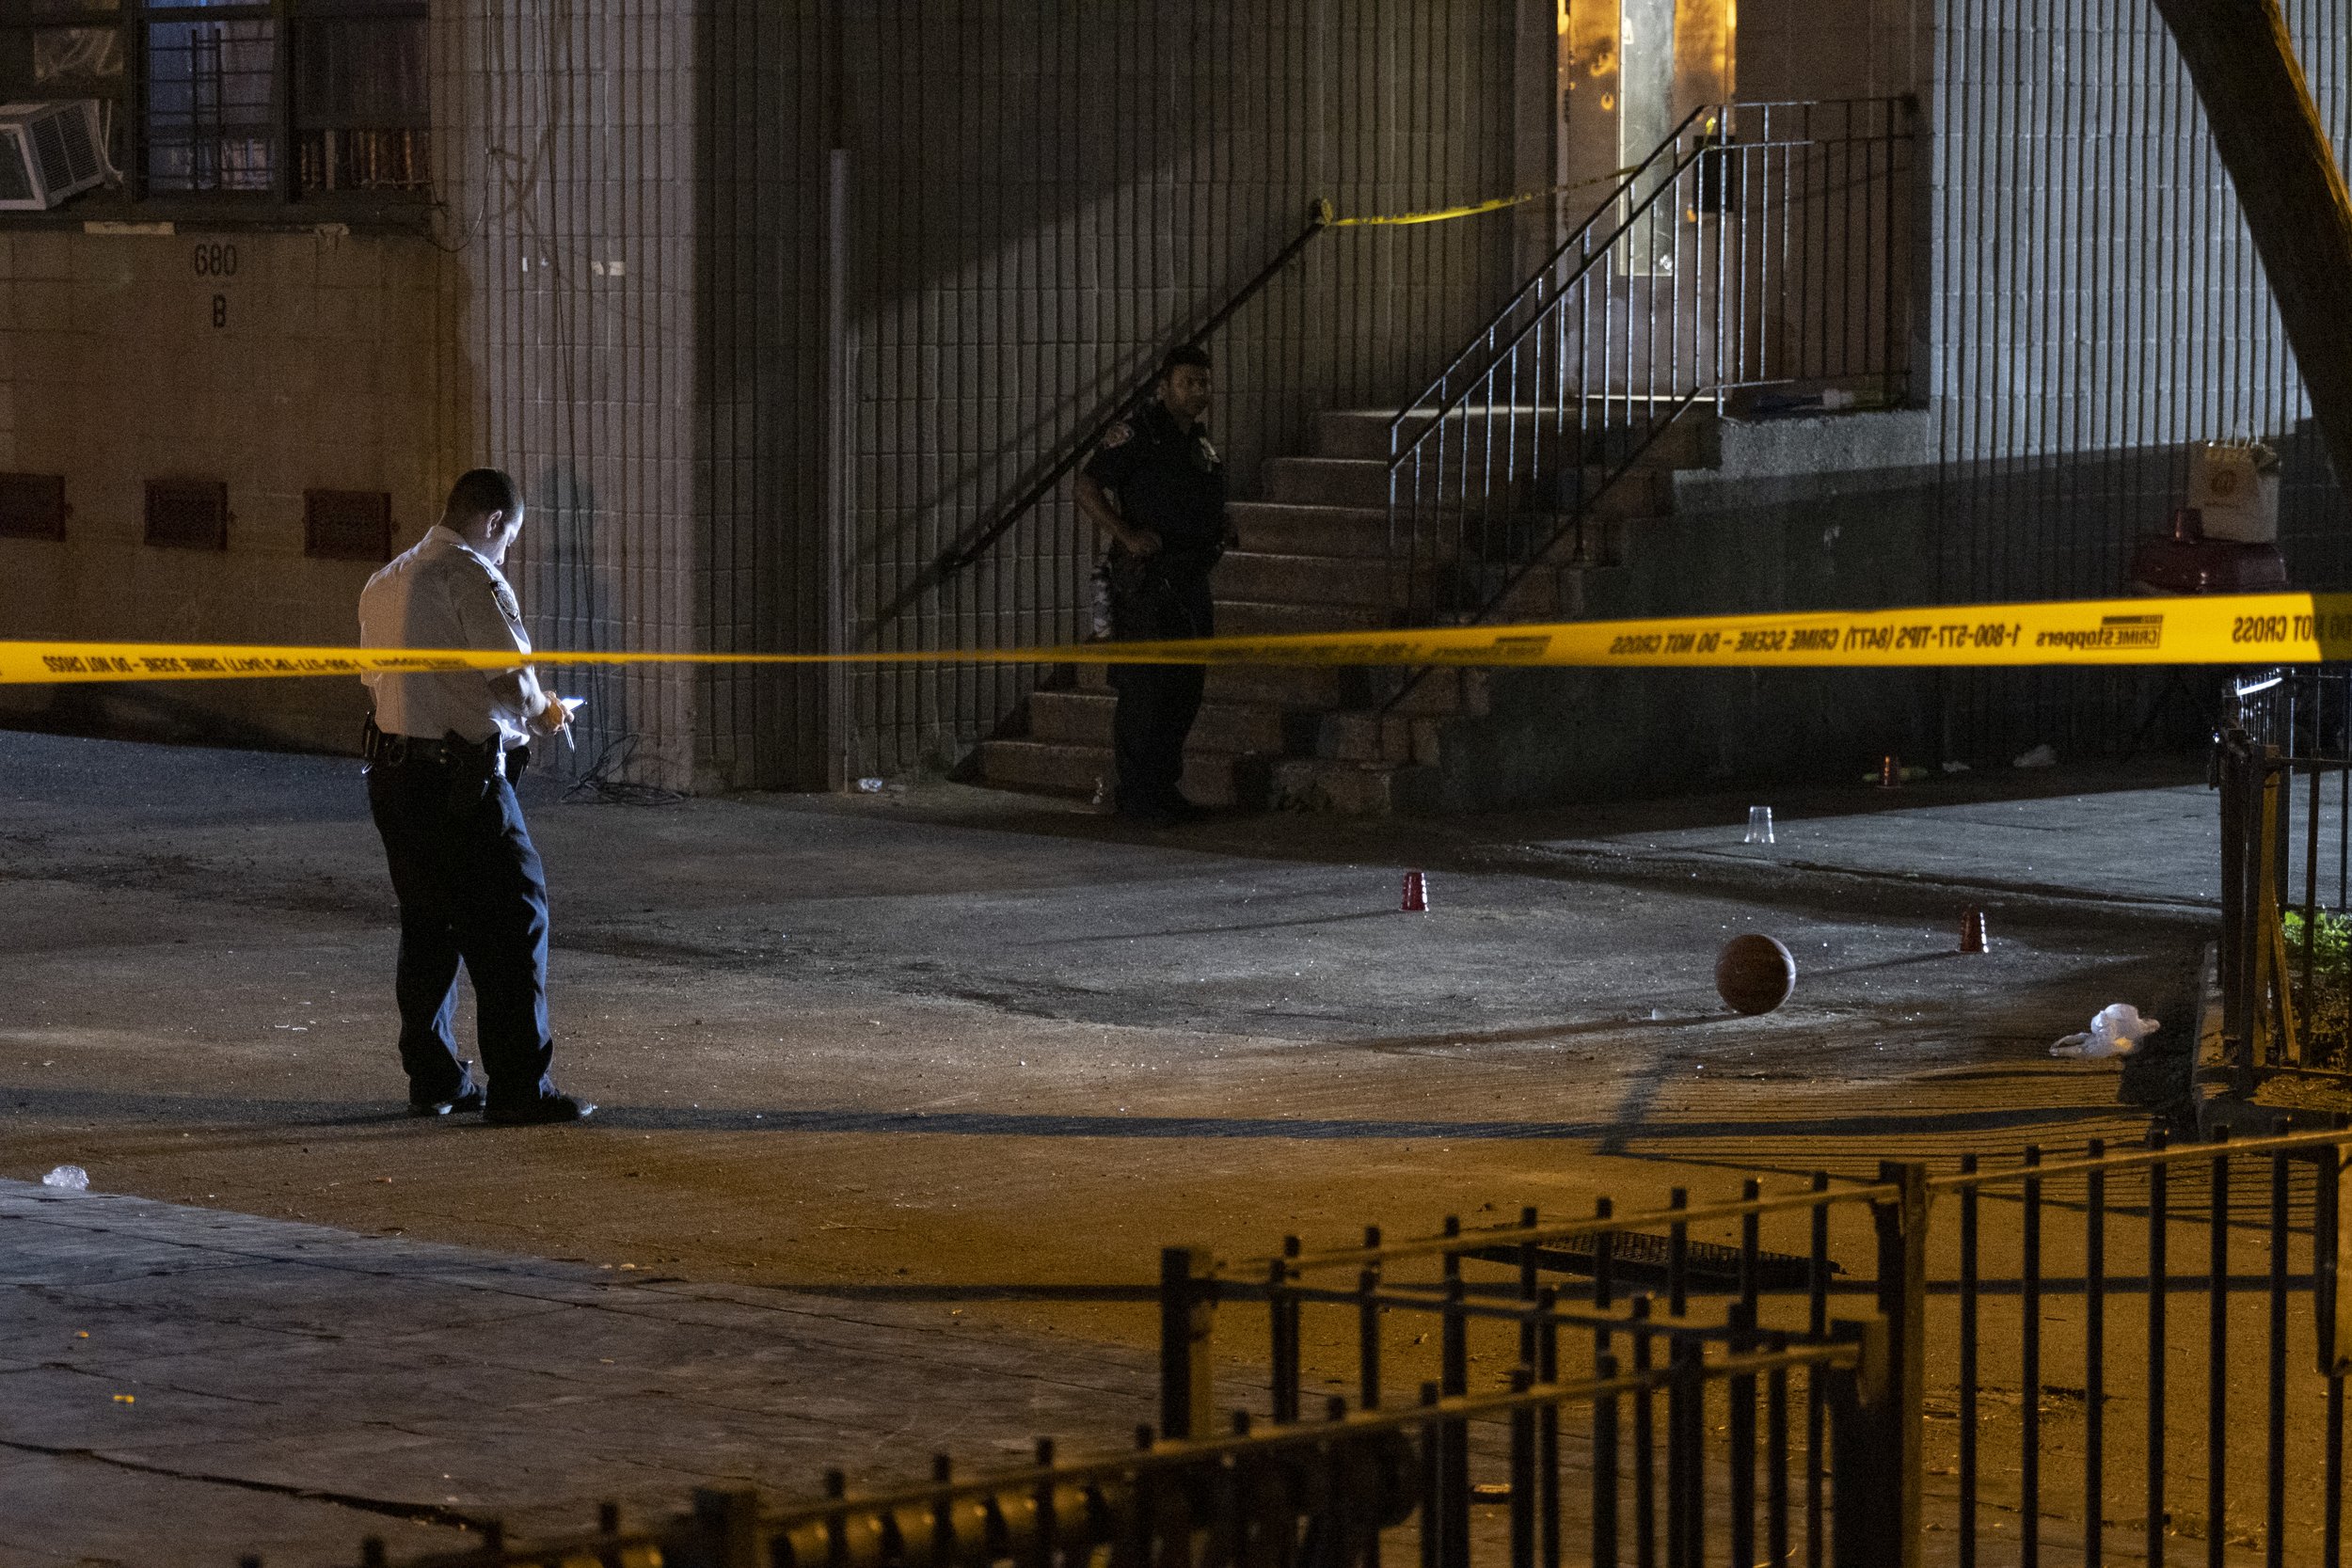  June 26th, 2022 - Brooklyn, NY: At approximately 11:30 p.m., officers from the 81st Precinct responded to a non-fatal mass shooting at 680 Quincy Ave. for four people shot, including a 8-year-old child who was grazed in the leg, during a BBQ taking 